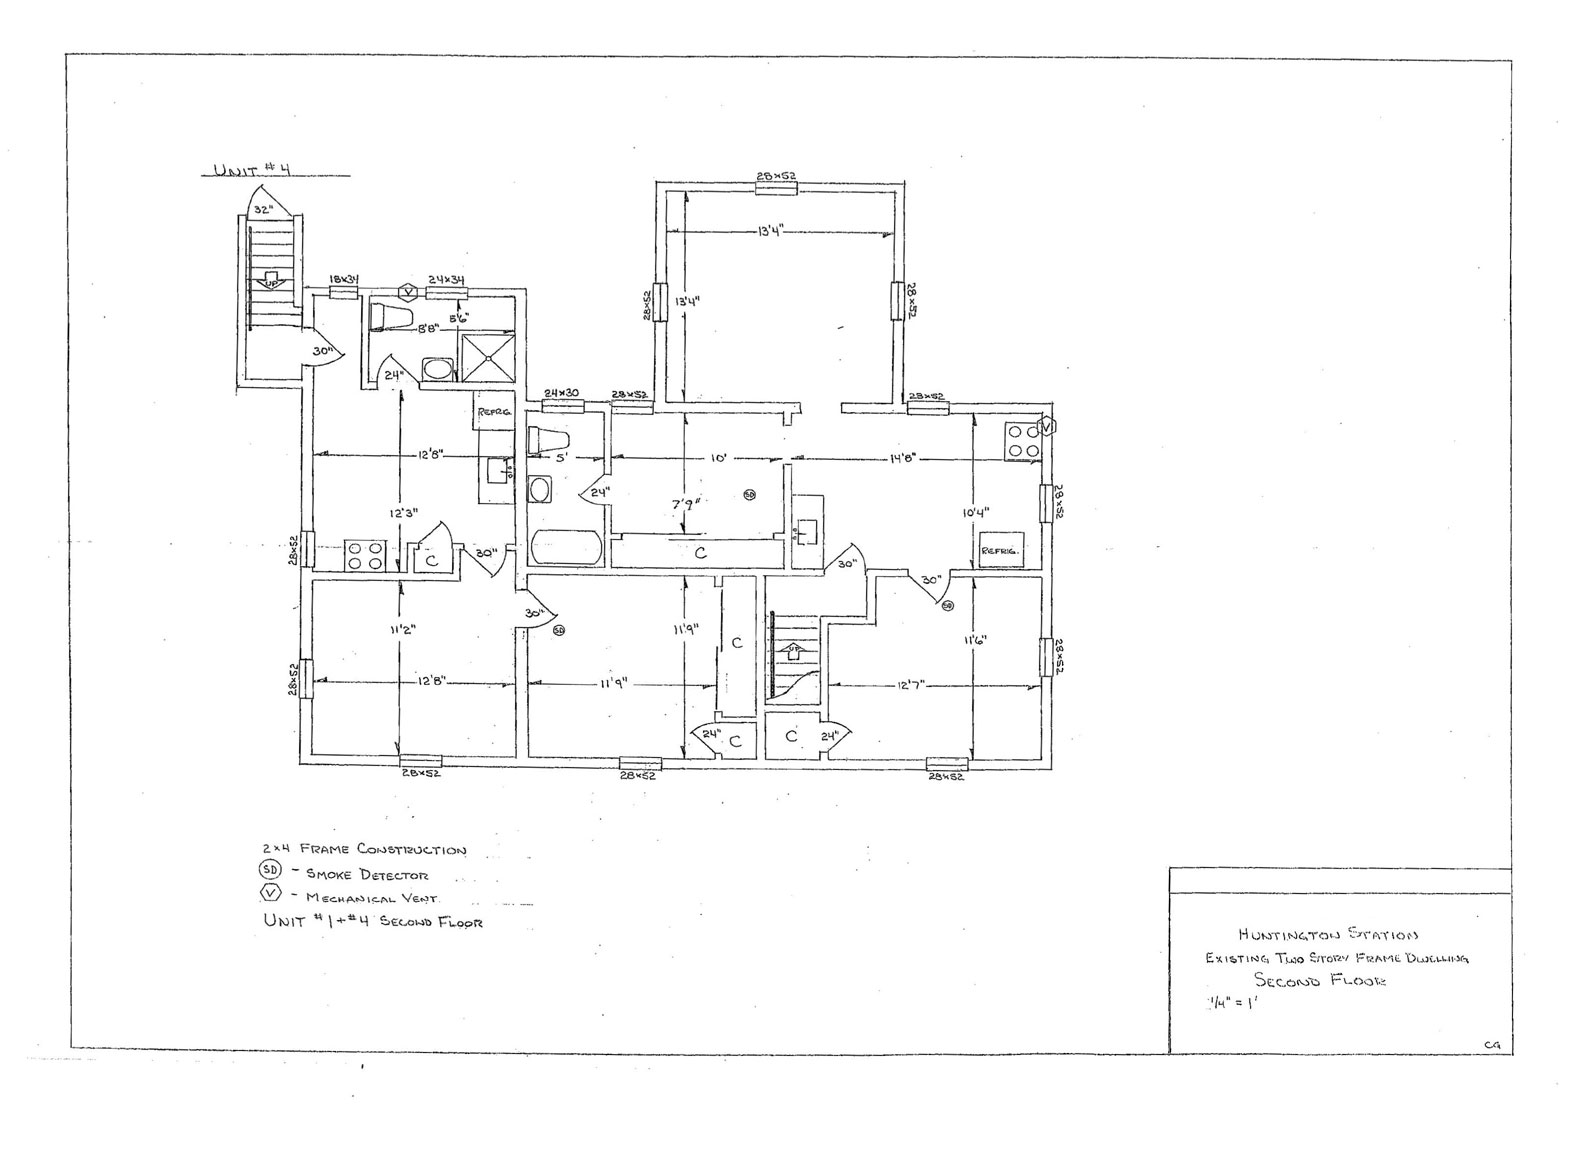 Second Floor Plans of Legal 4 Family on One Prime Acre C-6 Zoning